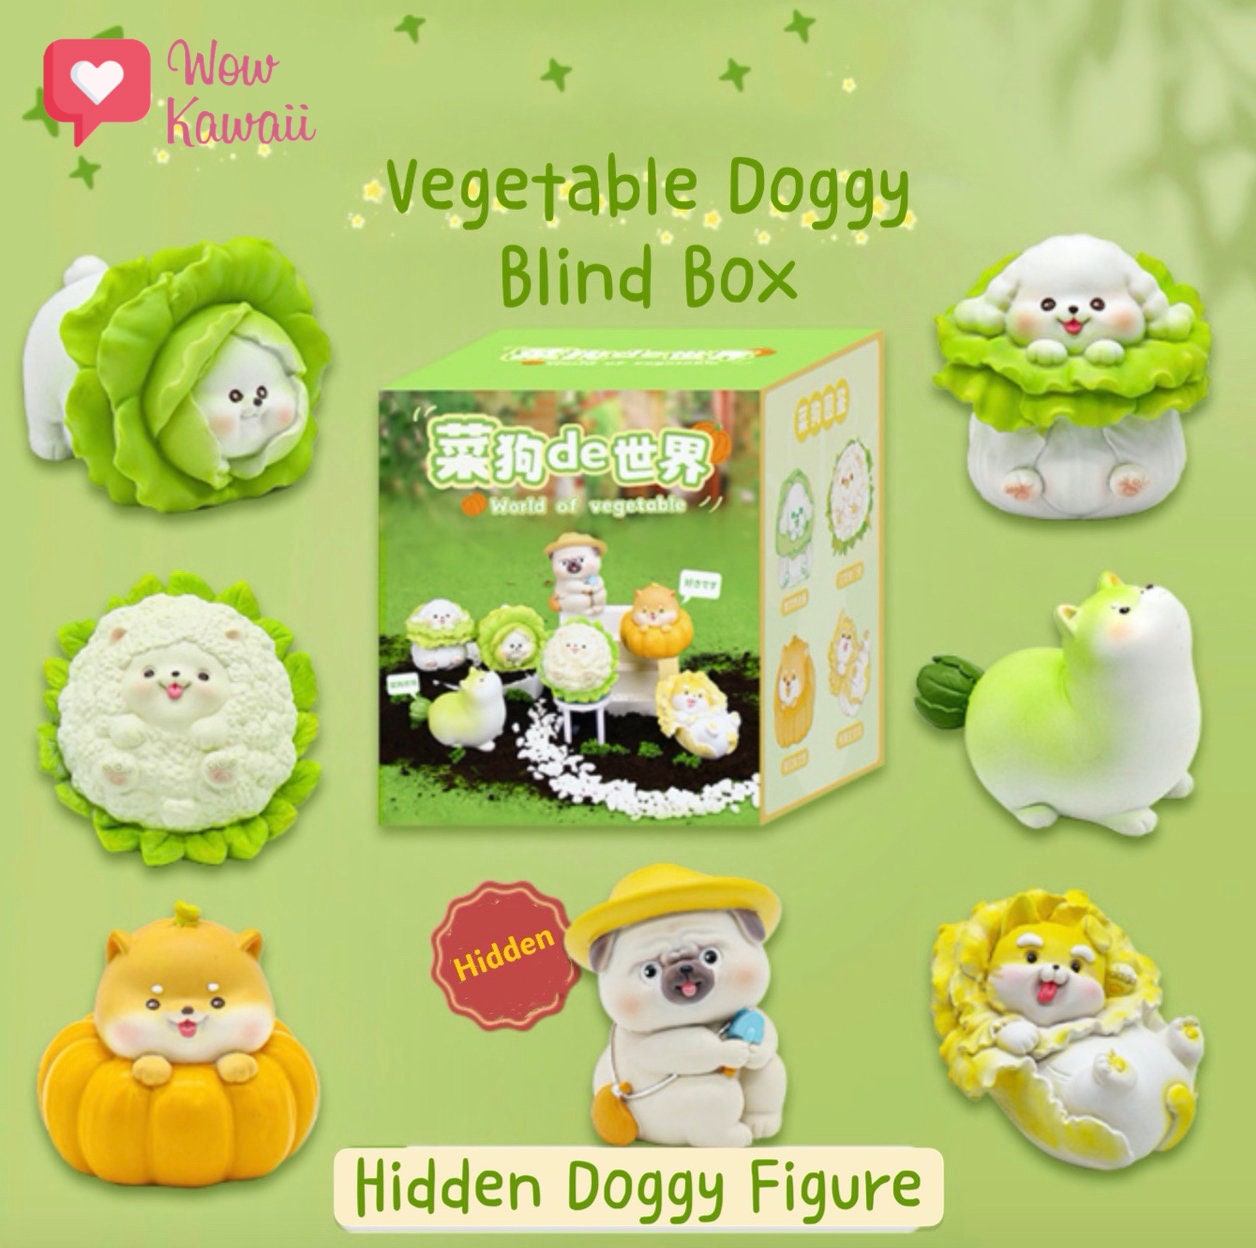 Pet Sniffing Fried Ball Toy Dog Blind Box Hidden Food Bubble